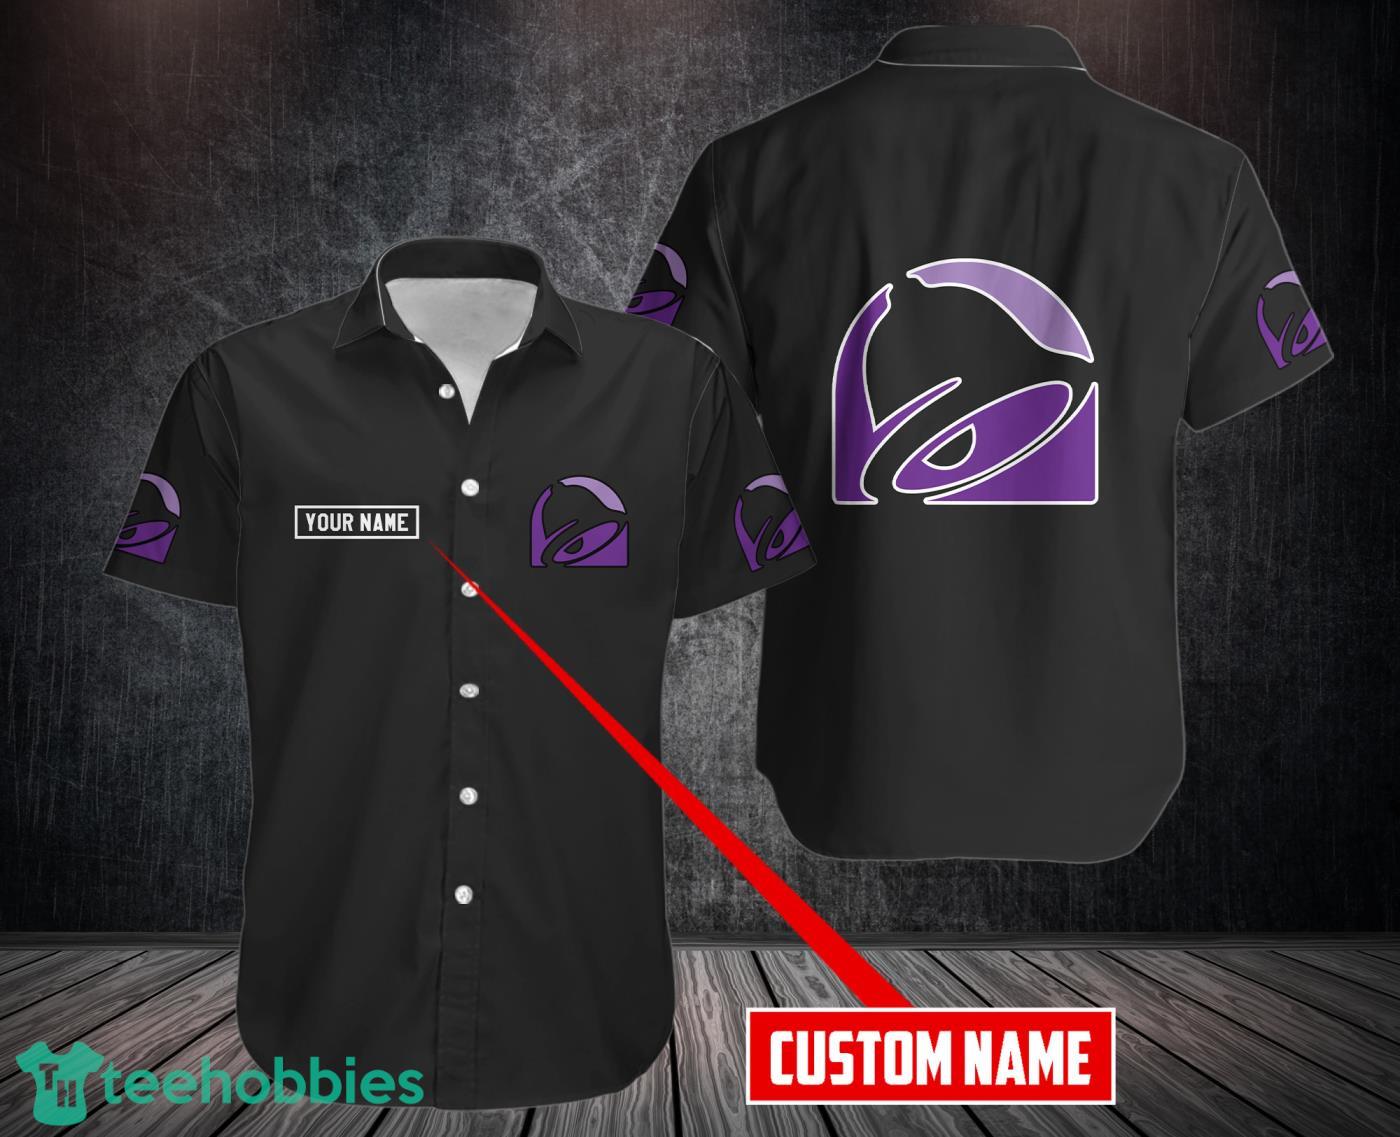 3d All Over Printed Taco Bell Black Hawaii Shirt For Men And Women Gift Custom Name Product Photo 1